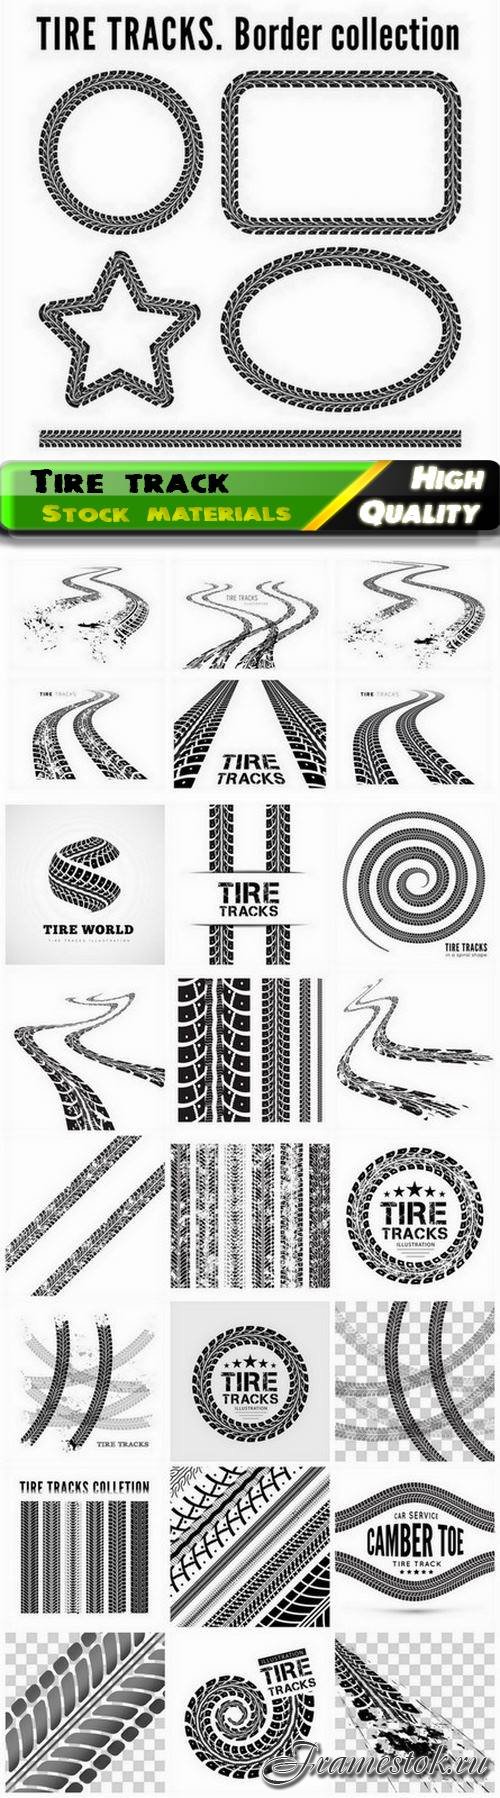 Abstract car and truck drift tire track background - 25 Eps